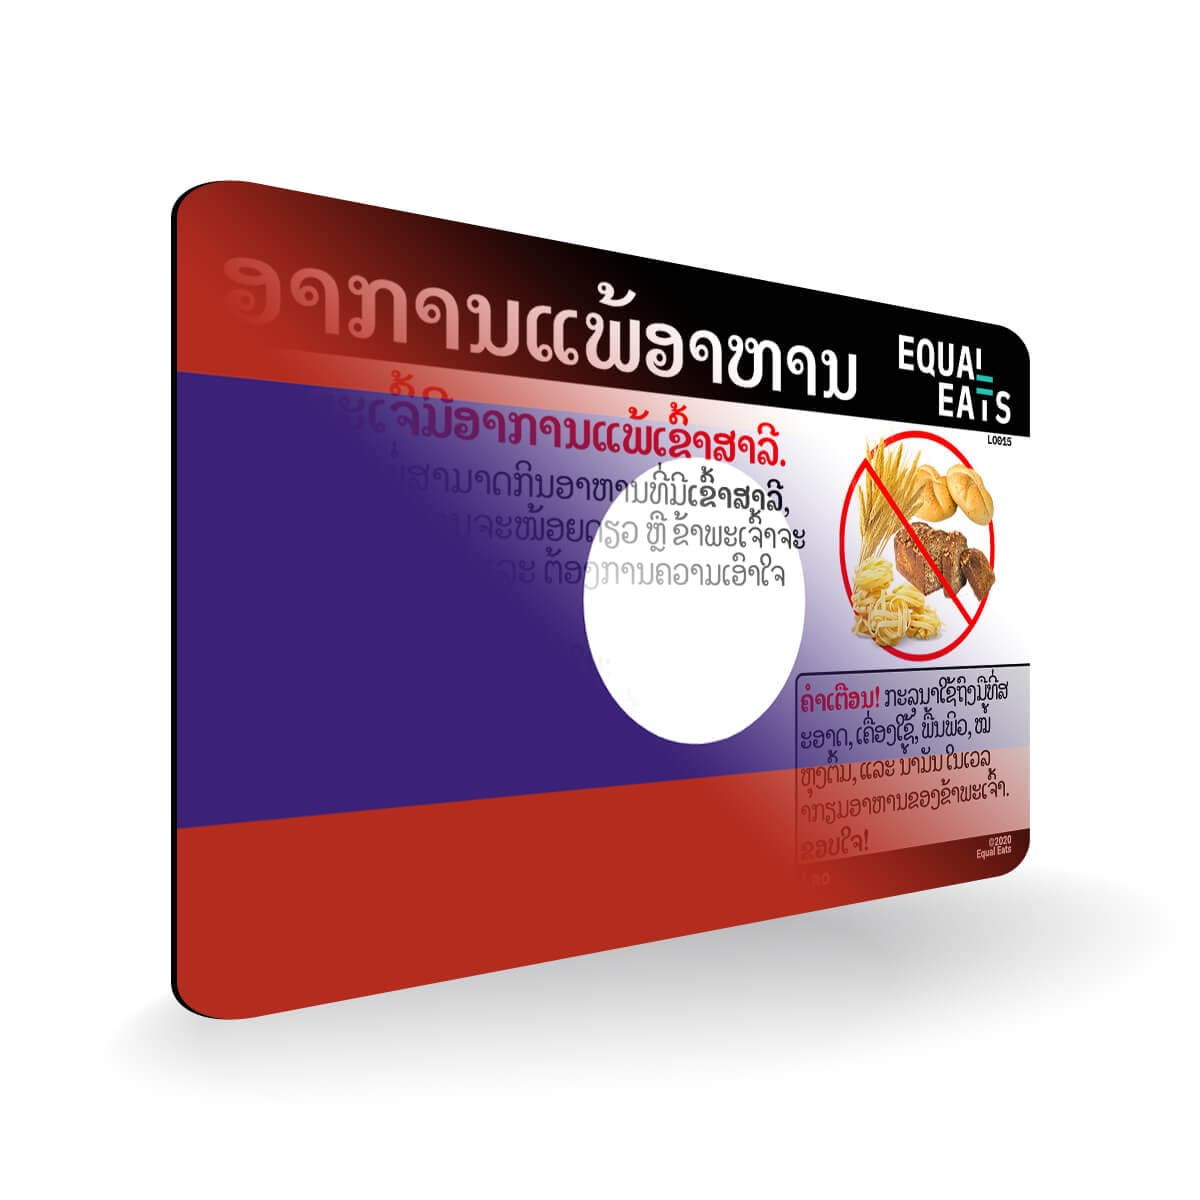 Wheat Allergy in Lao. Wheat Allergy Card for Laos